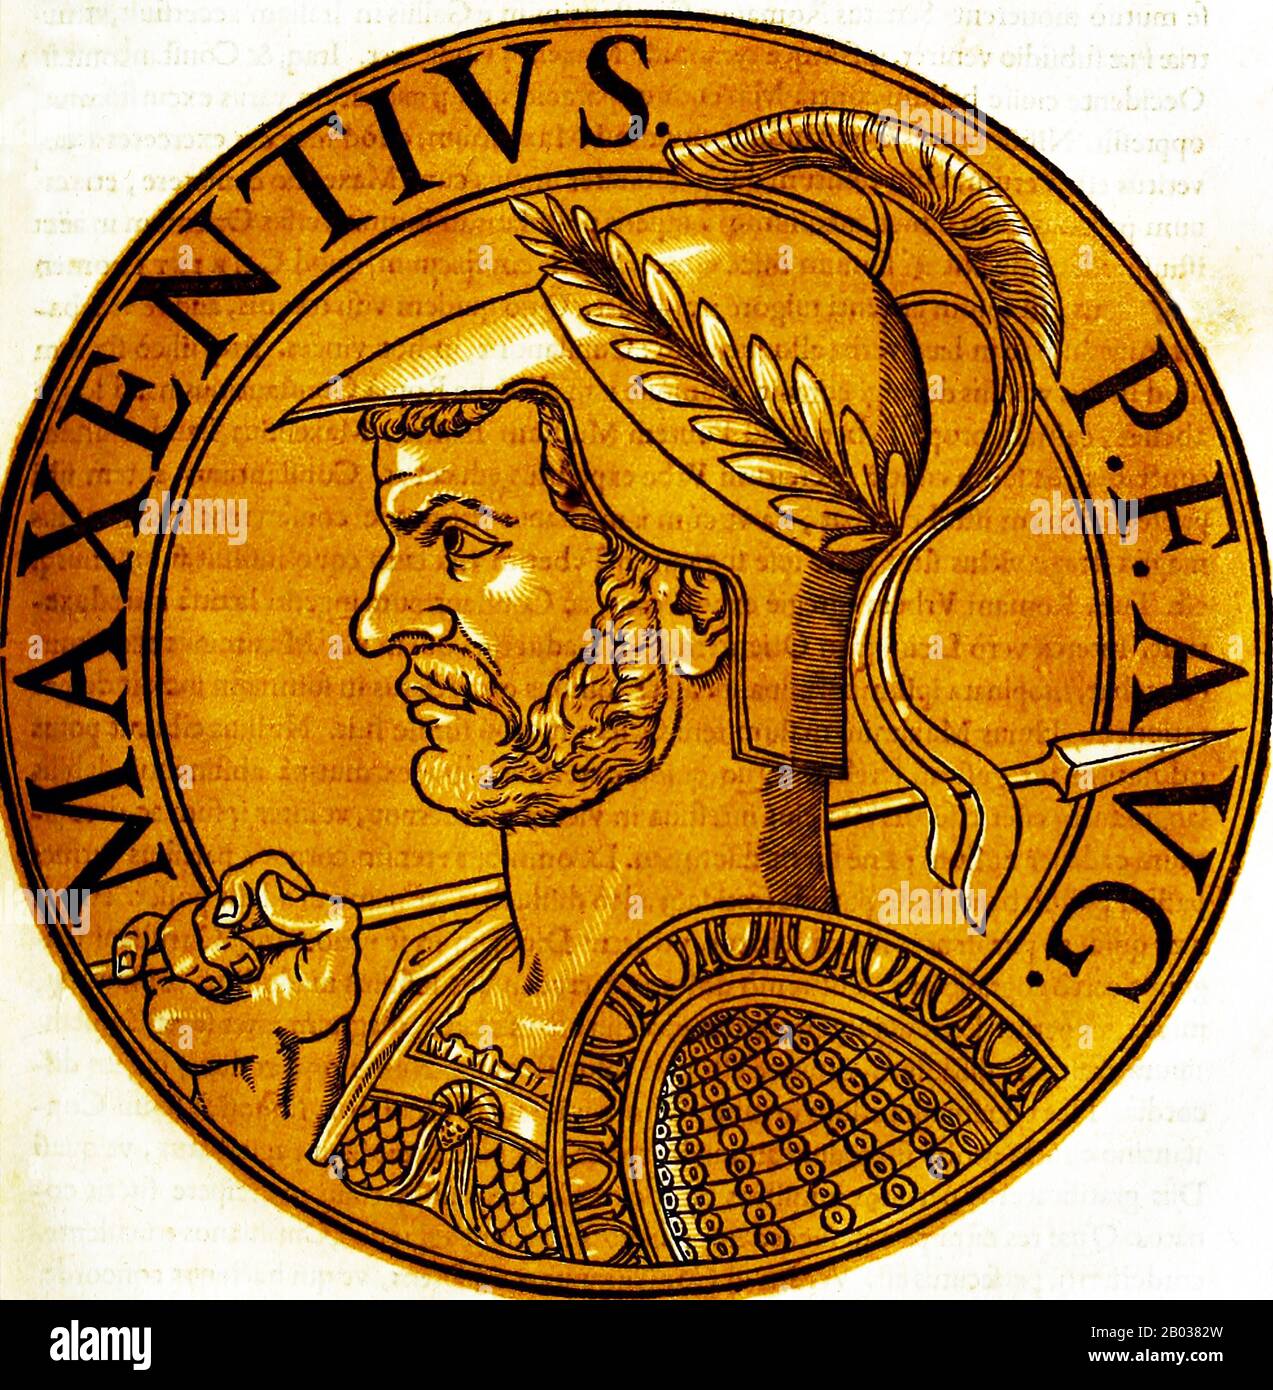 Maxentius (278-312) was the son of former Emperor Maximian, and son-in-law to Emperor Galerius. When his father and Emperor Diocletian stepped down, Maxentius was passed over in the new tetrarchy established by Emperors Constantius and Galerius, the latter nominating Severus and Maximinus Daia as junior co-emperors. Galerius hated Maxentius and used his influence to halt his succession.  When Constantius died in 306 and his son Constantine was crowned emperor and accepted into the tetrarchy, Maxentius was publicly proclaimed emperor later in the same year by officers in Rome. Severus marched t Stock Photo